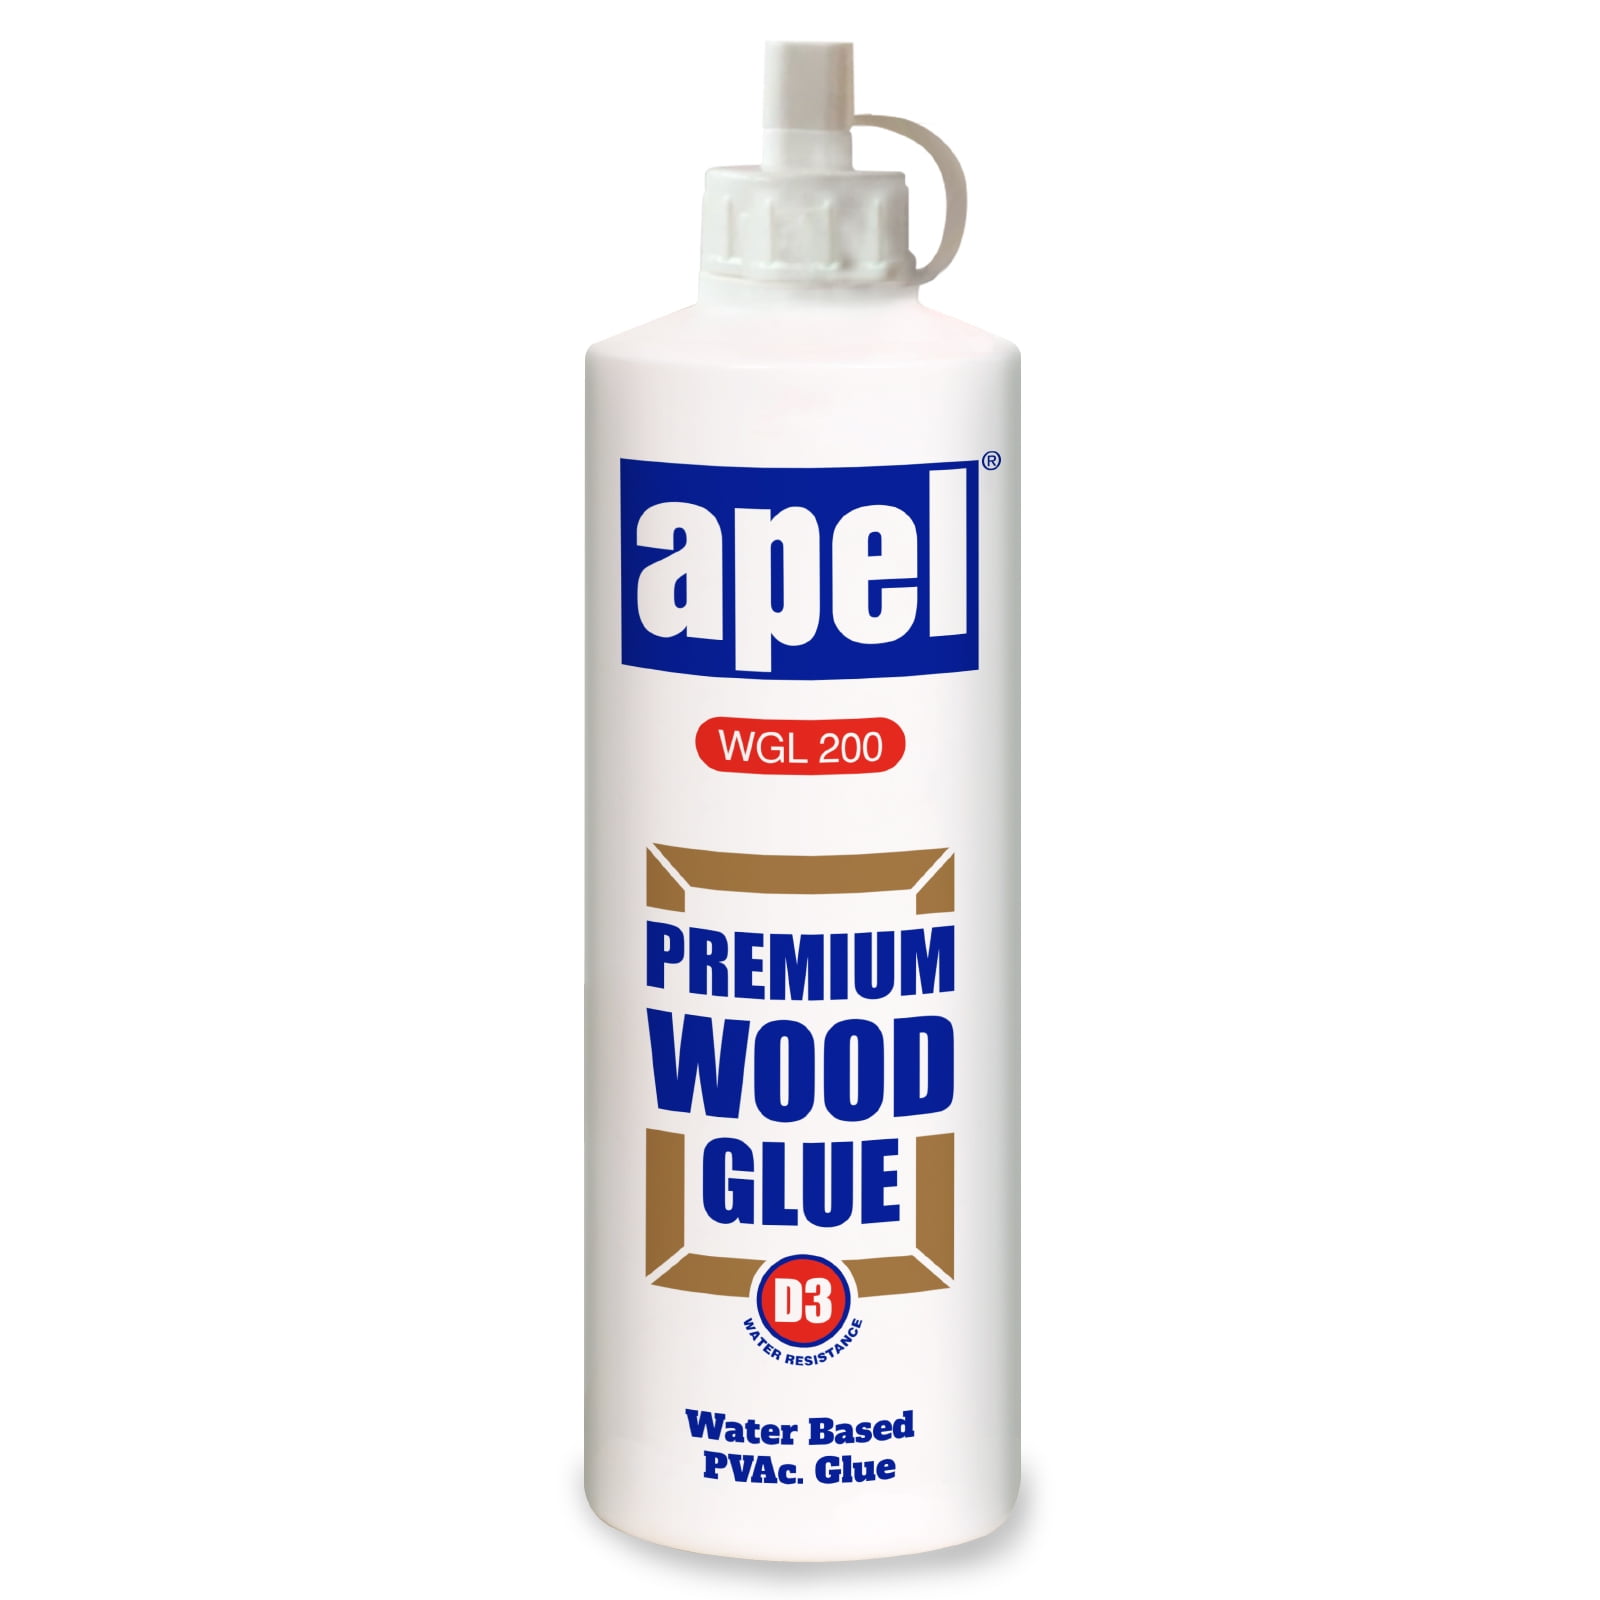 Wood Glue For Woodworking And Hobbies, Extra Strength For Crafts, 16 oz./1  pound, Water Based Clear PVA Glue For Interior & Exterior, Low Viscosity (1  Pack) 